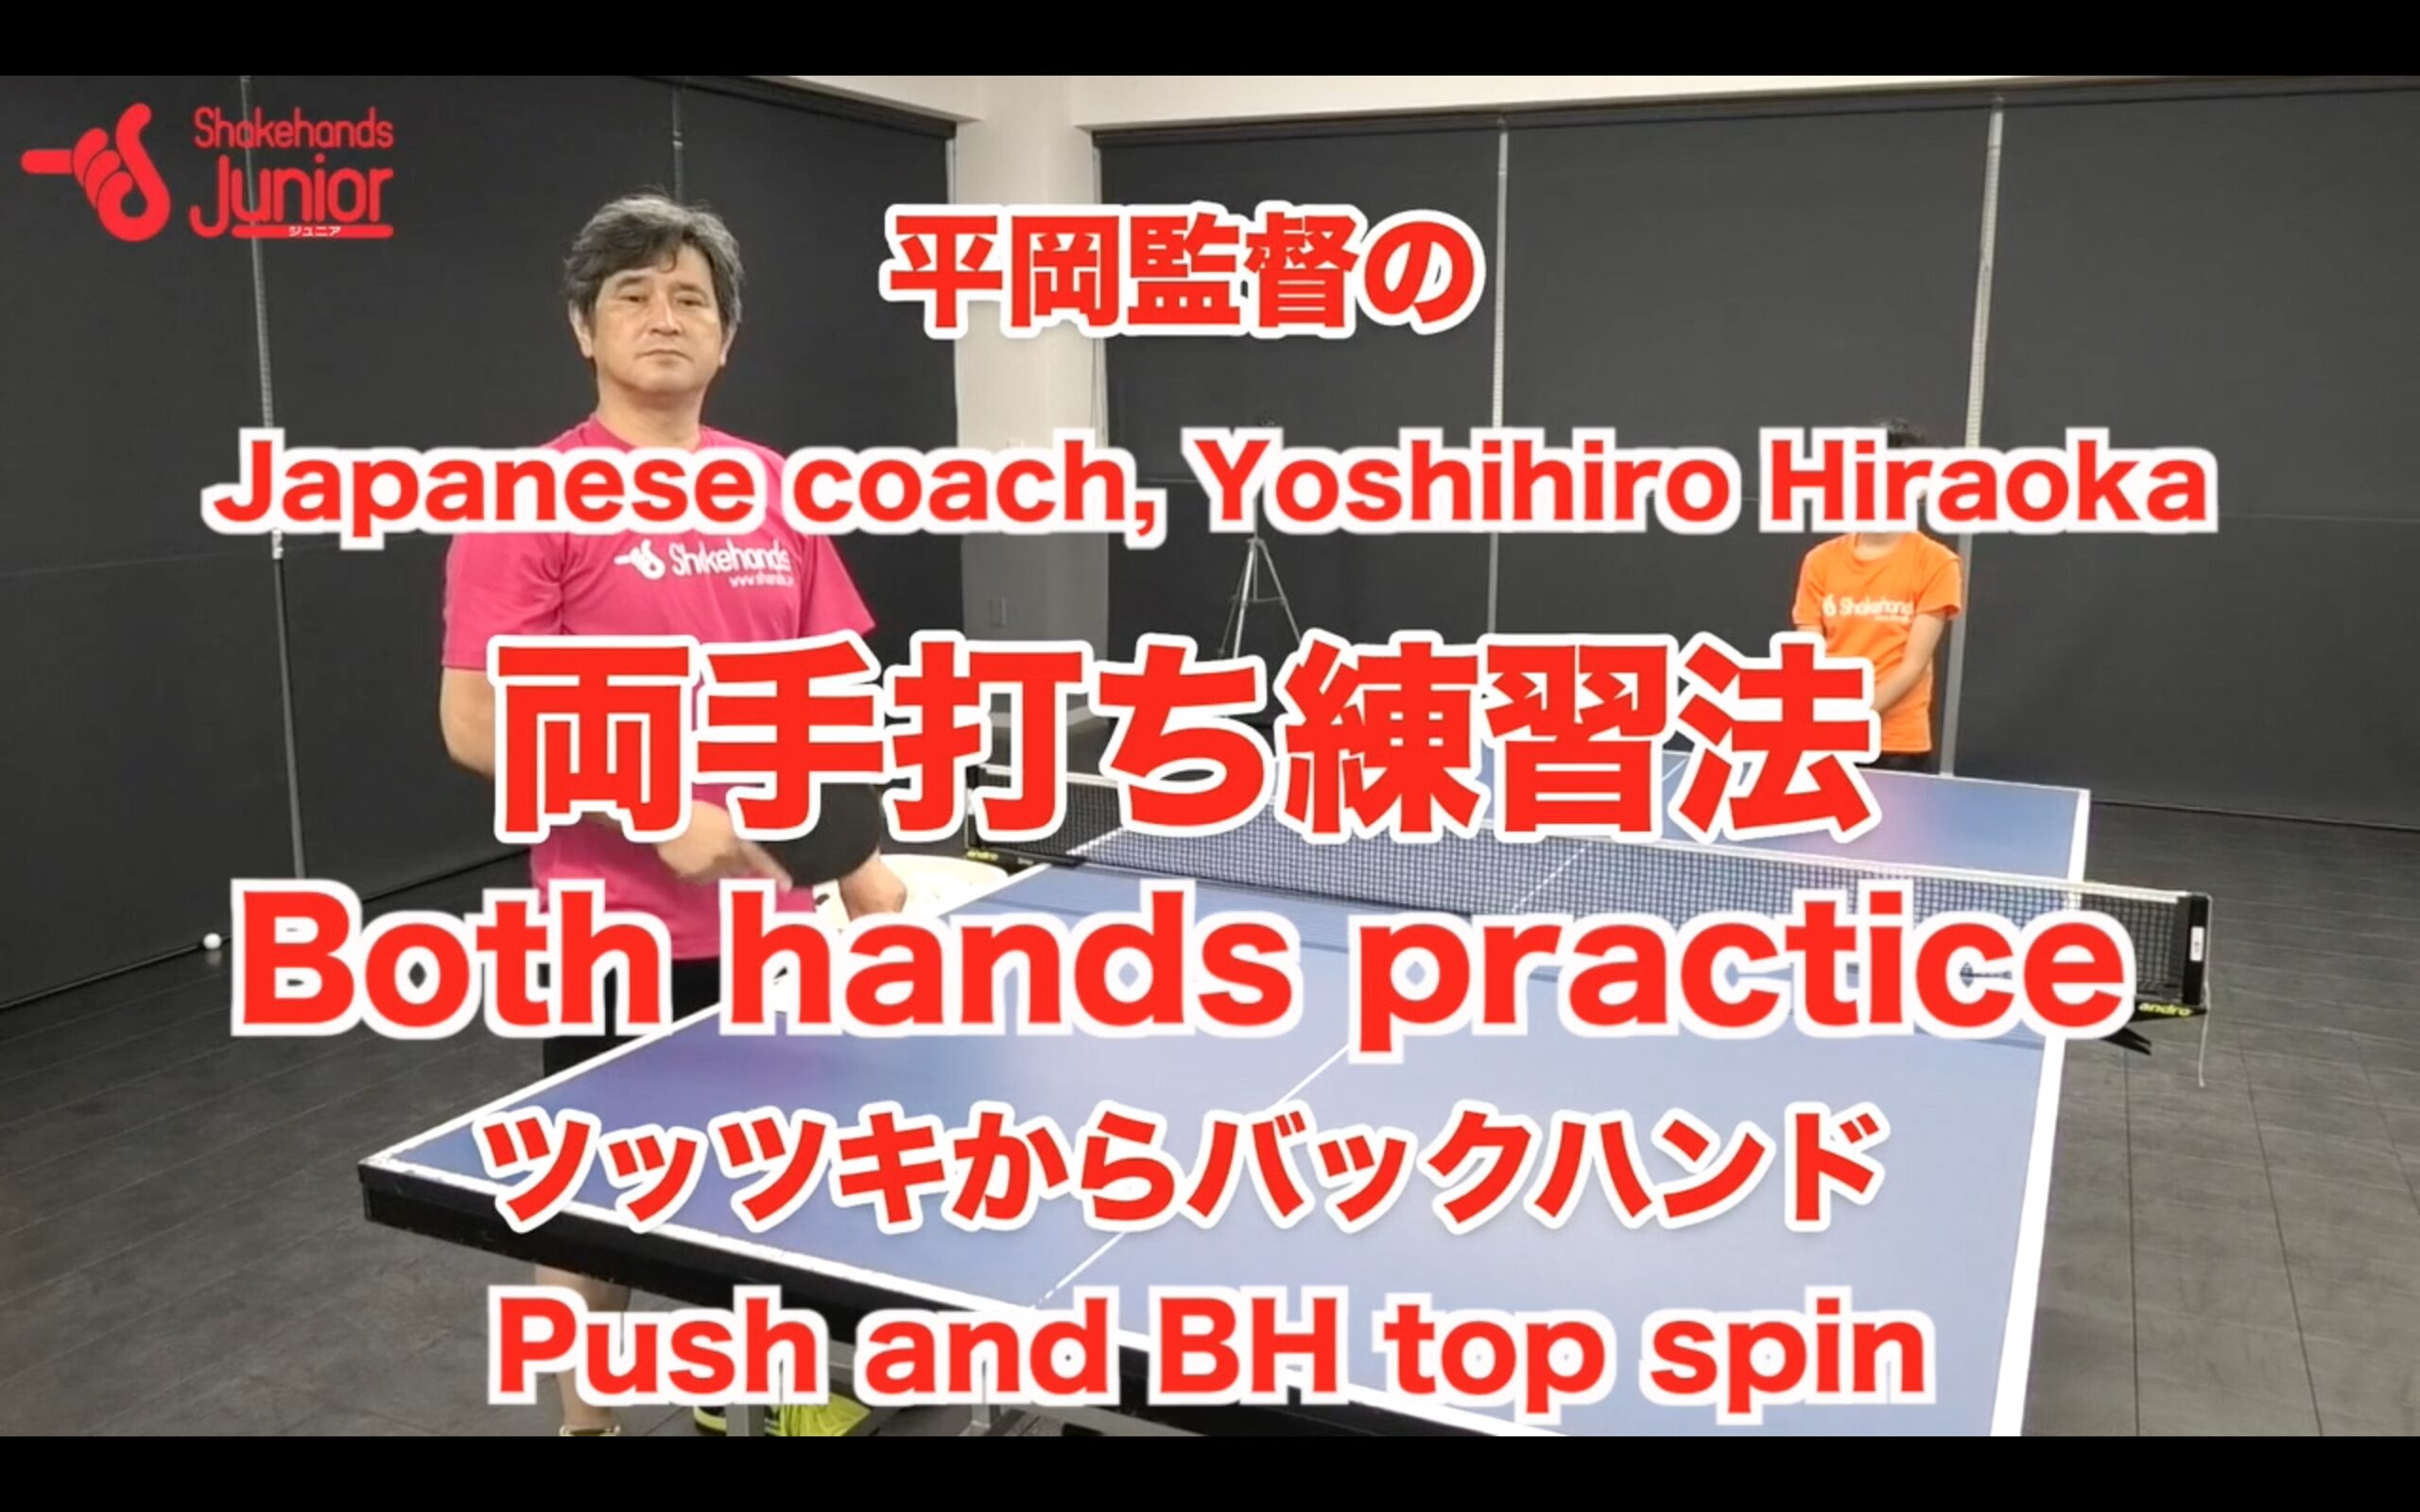 Both hands practice push and BH top spin